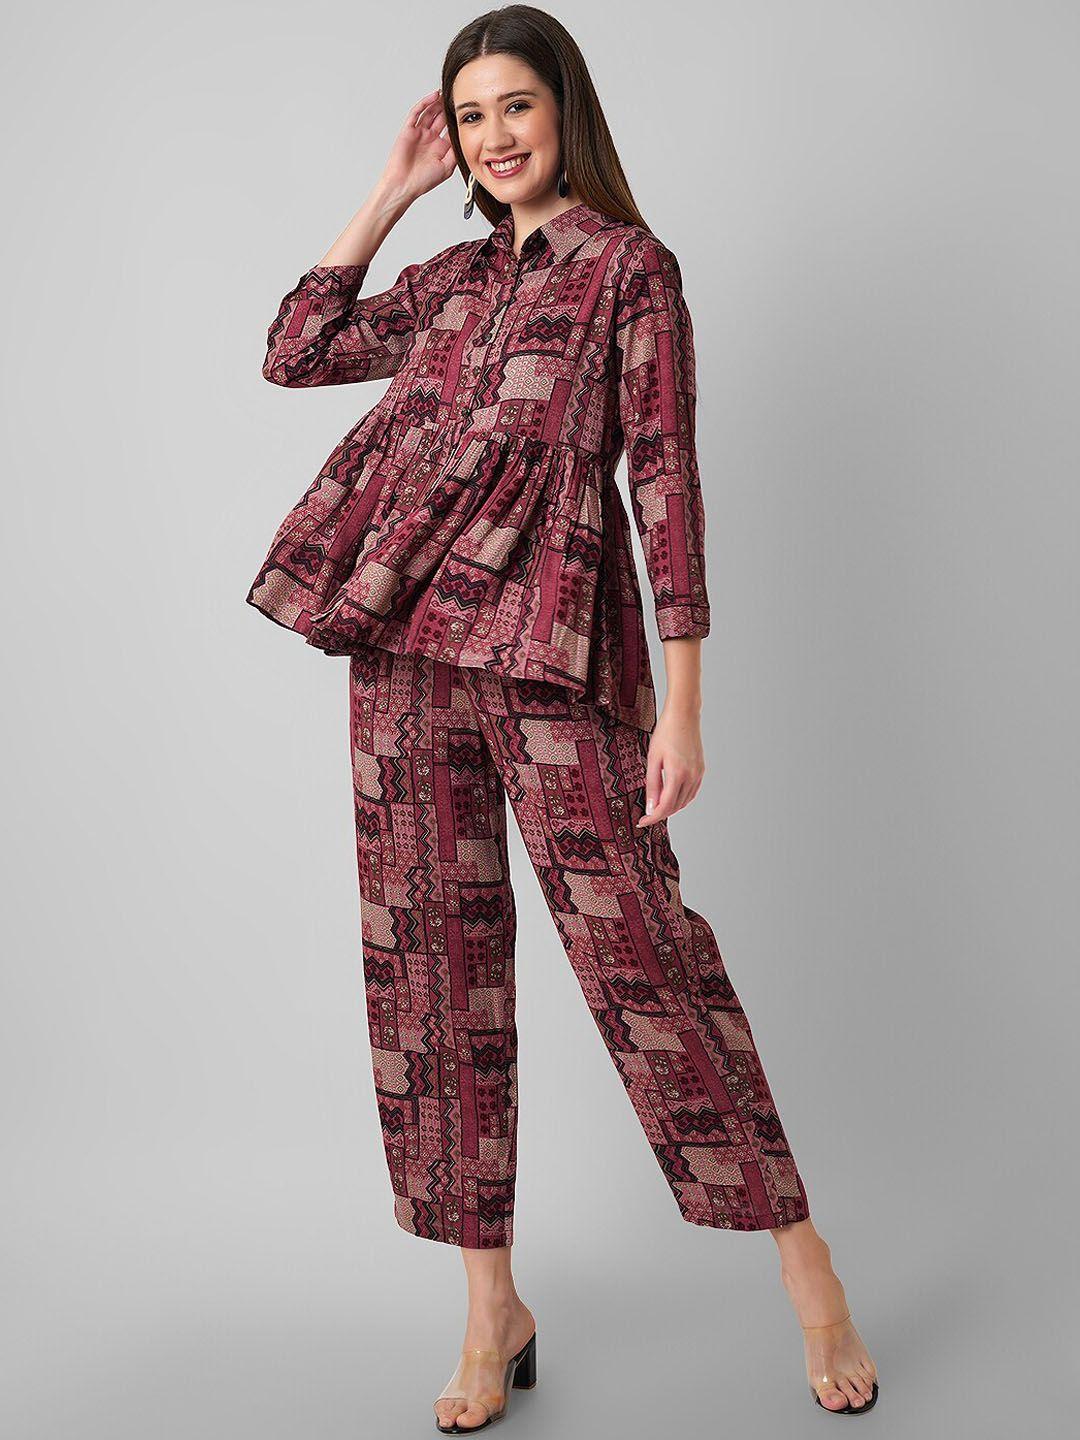 haute and humble printed pure cotton tunic and trousers co-ords